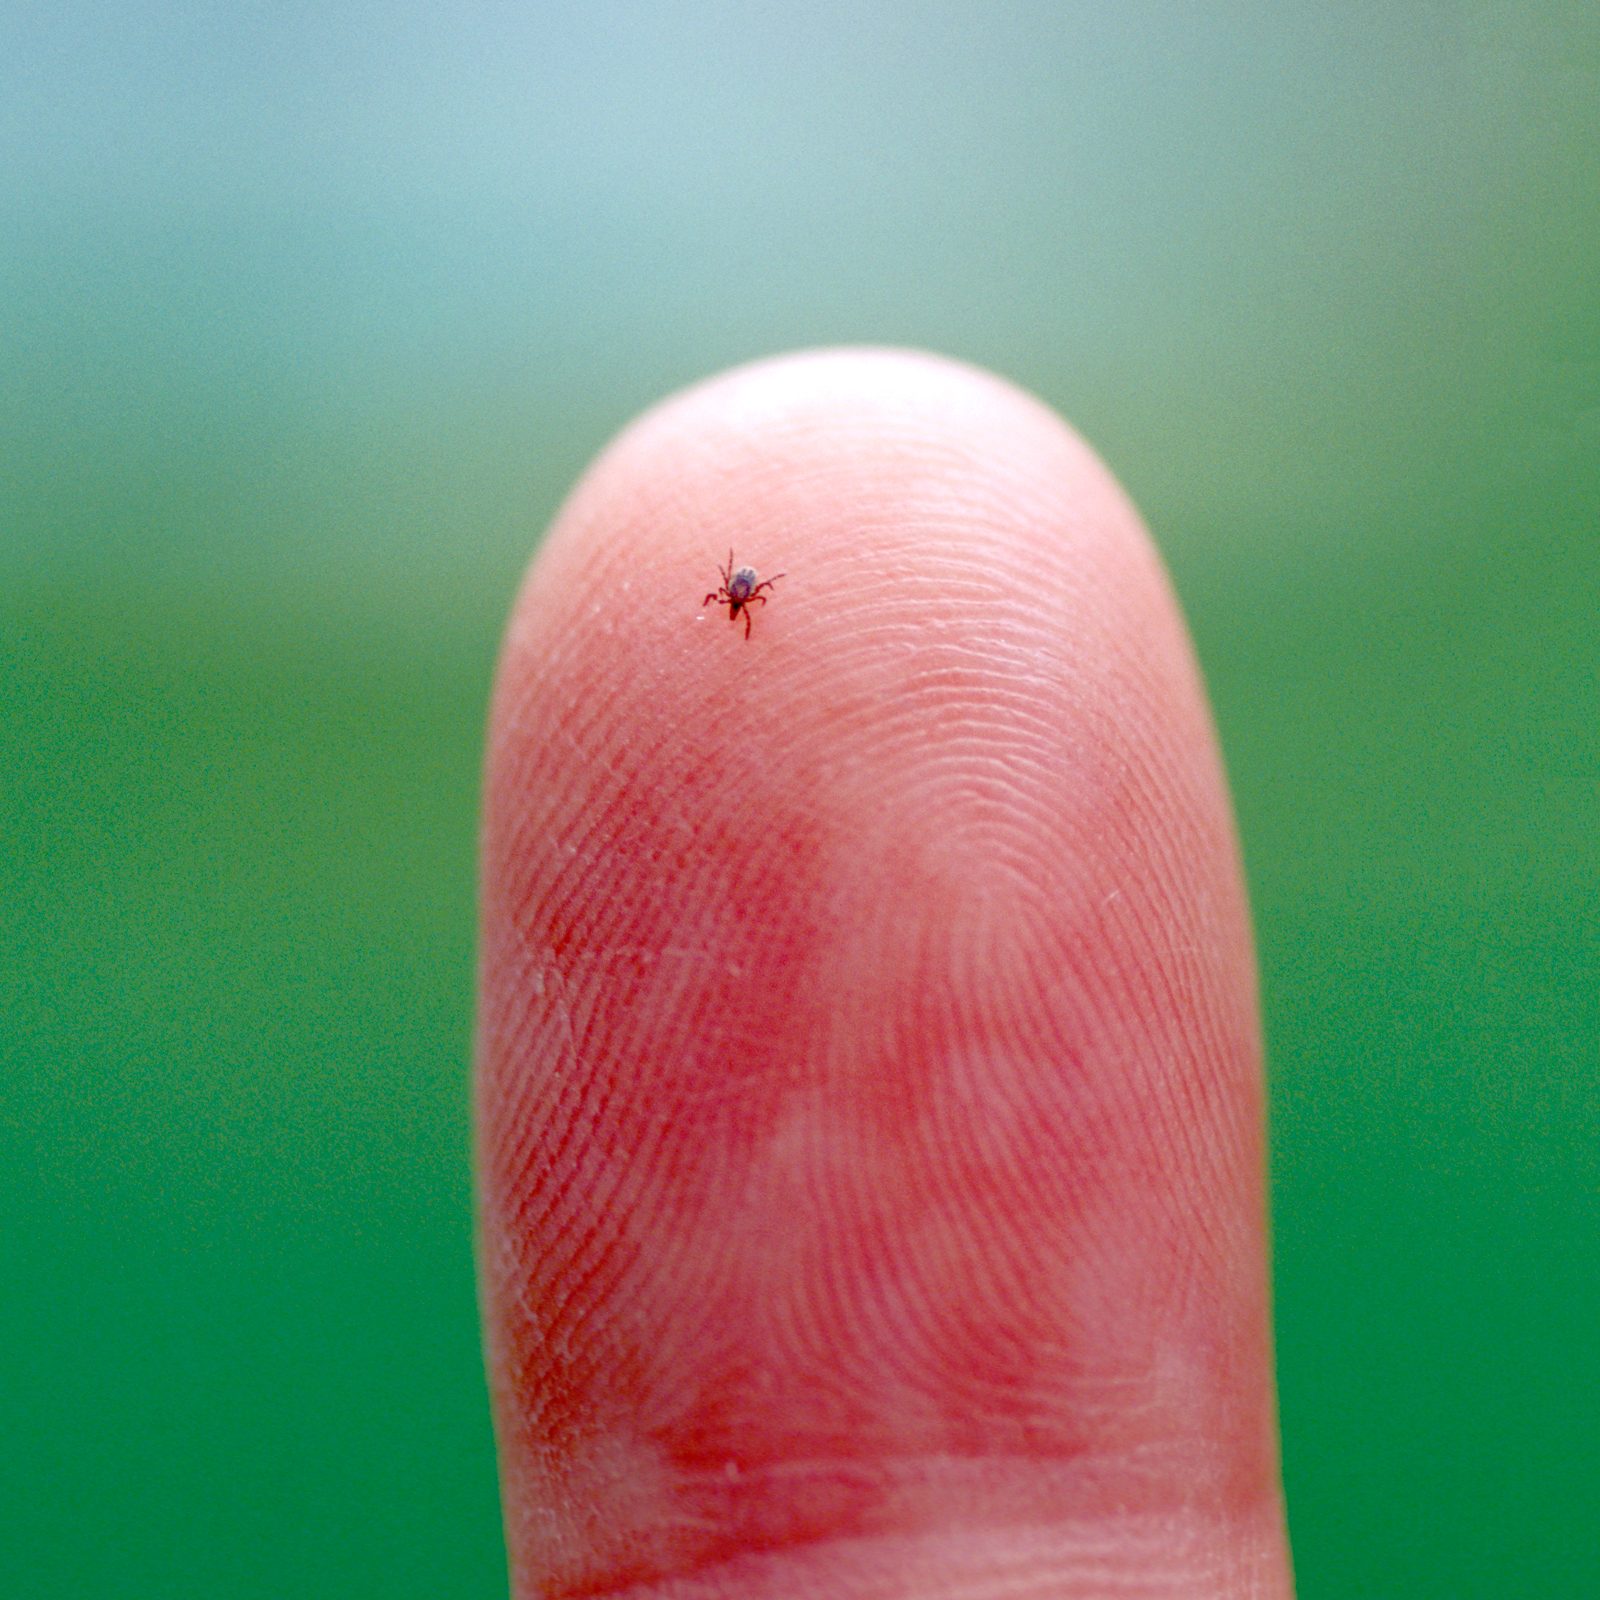 Here's Why There Are So Many Ticks This Summer, Say Experts